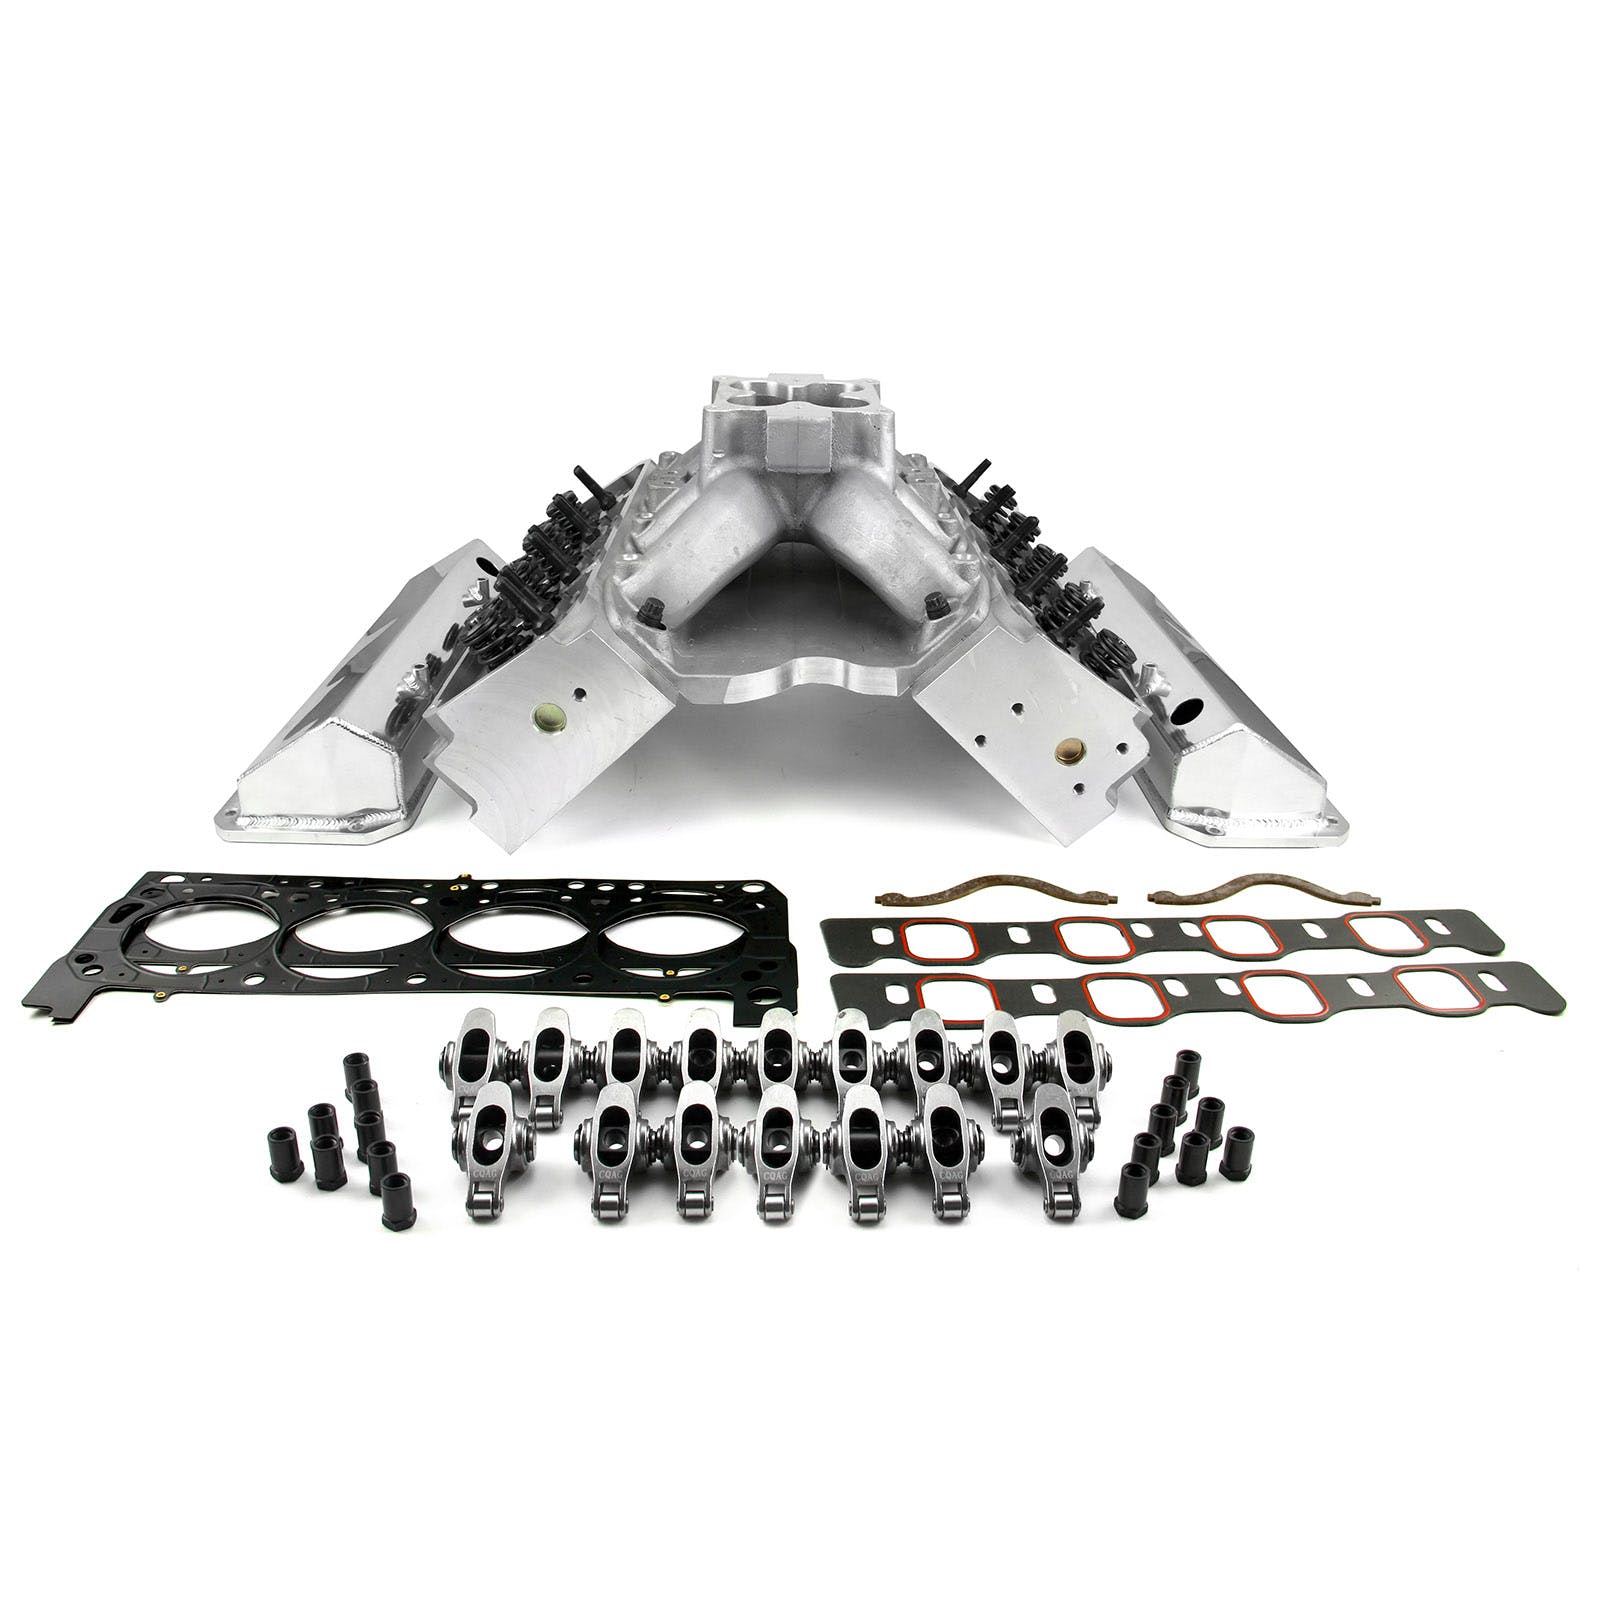 Speedmaster PCE435.1057 9.5 Deck Fusion Manifold Hyd FT Cylinder Head Top End Engine Combo Kit